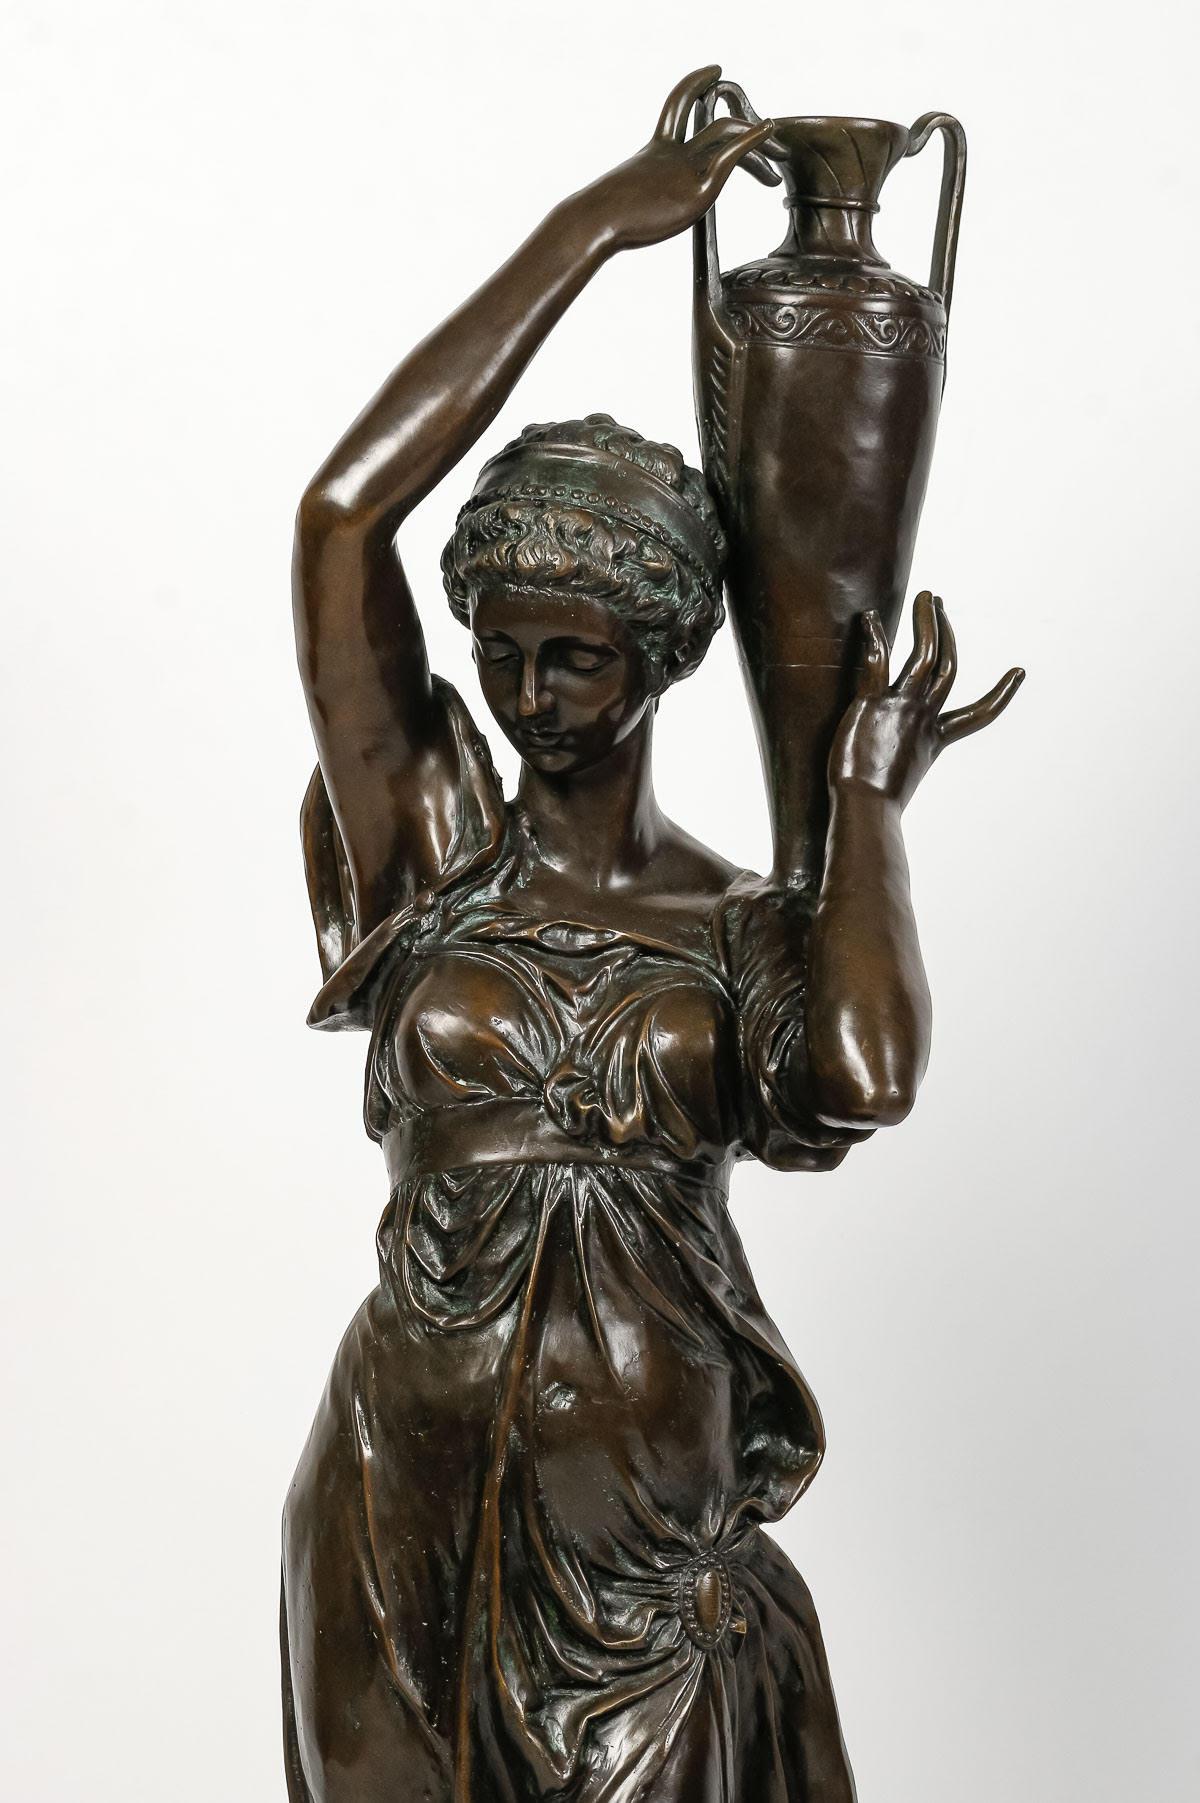 Large bronze sculpture by A.CARBIER from the 19th Century.

Elegant sculpture by A.CARBIER in patinated bronze from the 19th century, Napoleon III period, signed A.CARBIER, stamped in the bronze 